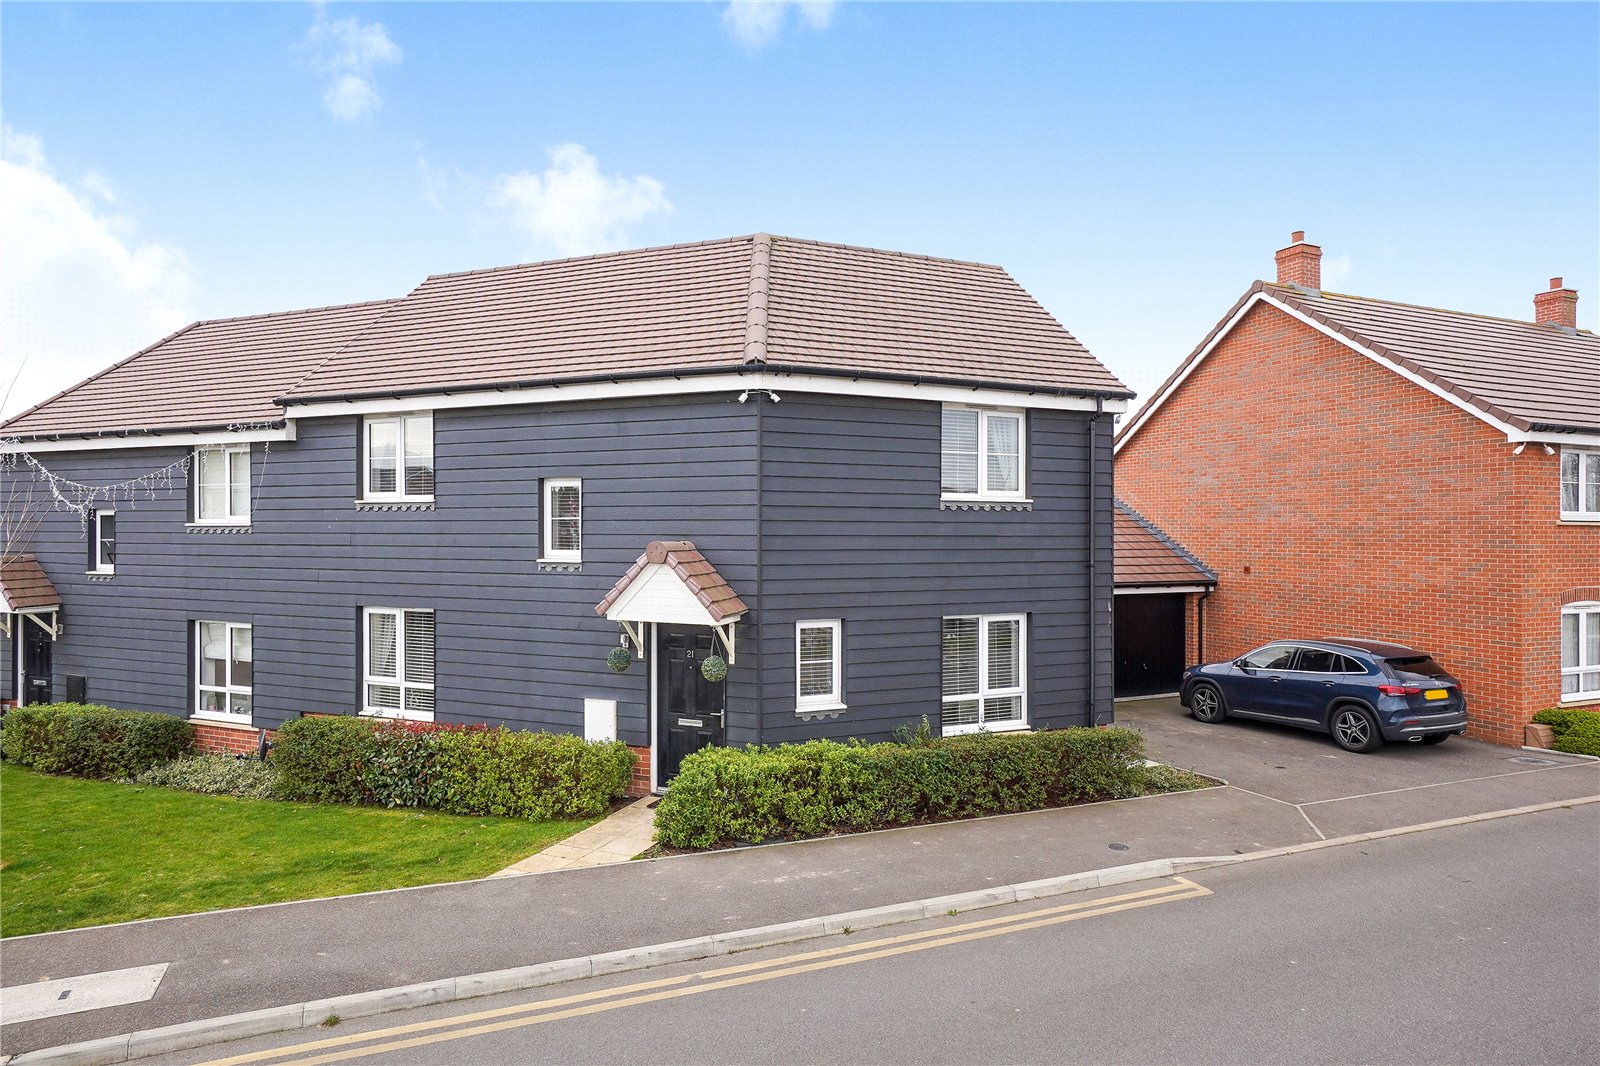 3 bed house for sale in Laight Road, Maidstone, ME17